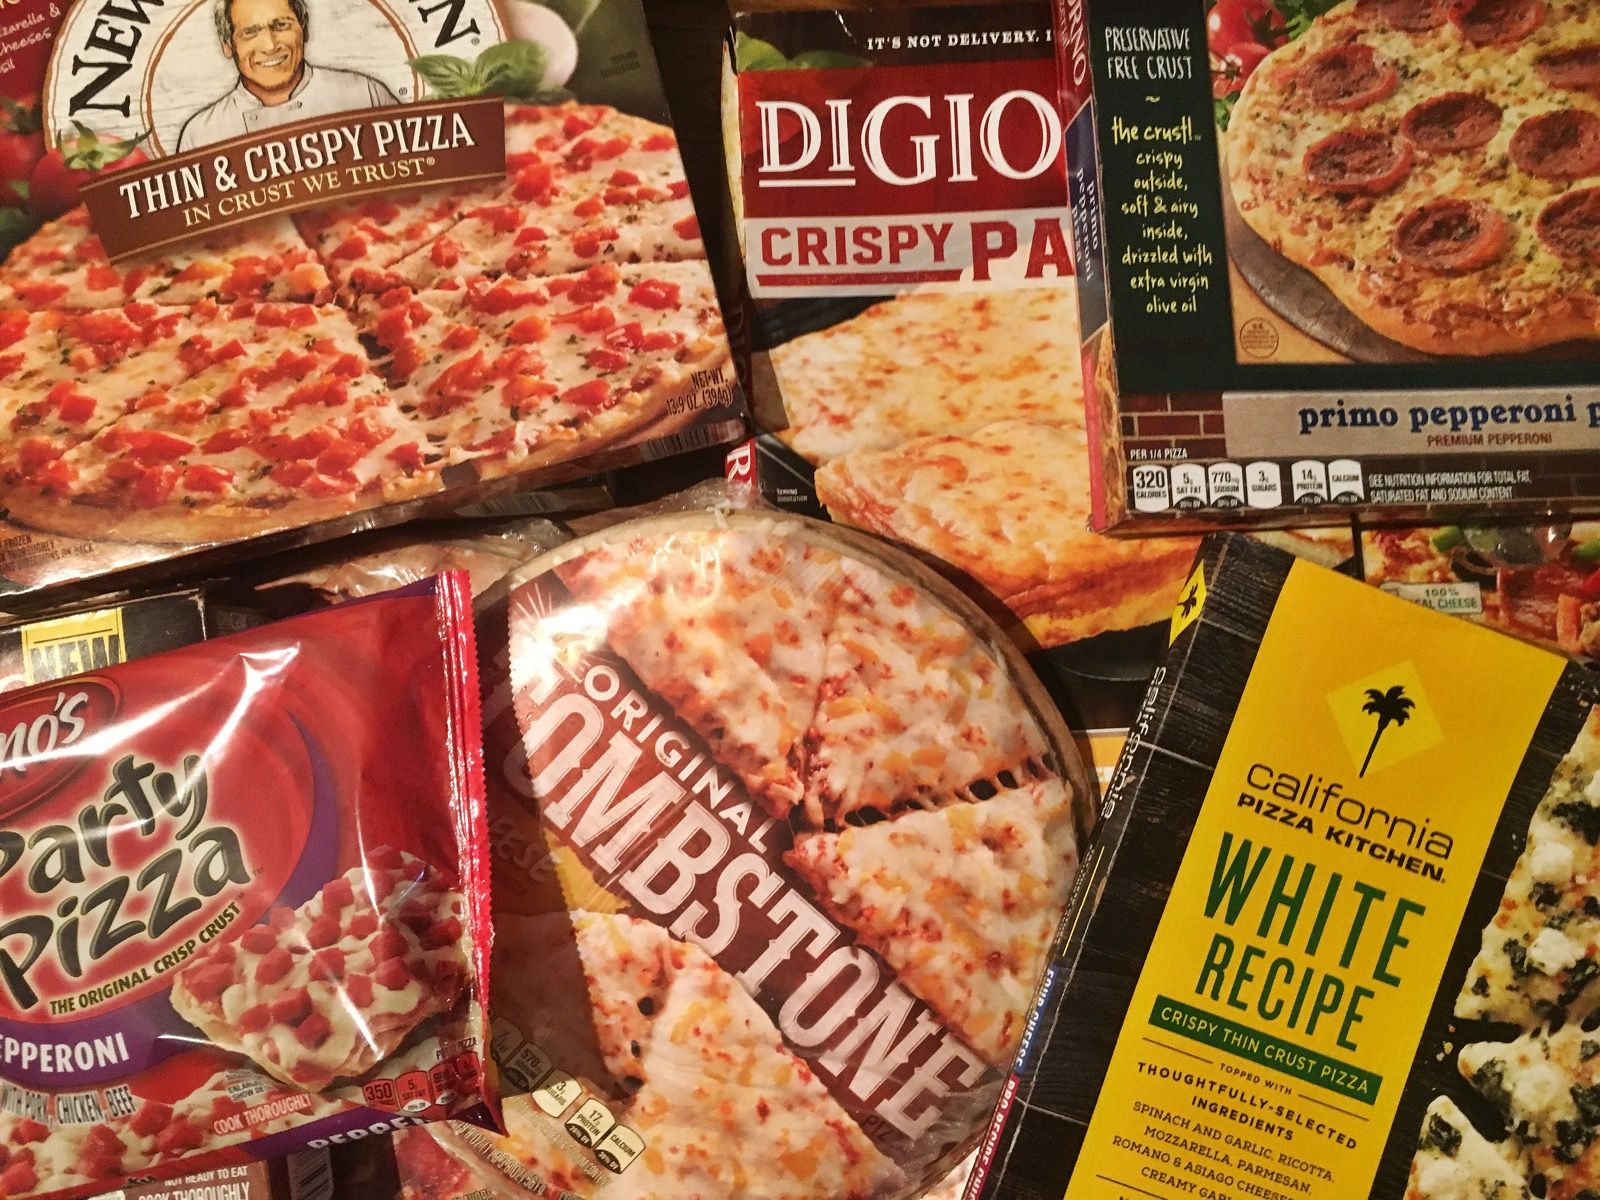 <p>We know frozen pizzas aren't usually what you think of when you picture yourself biting into a hot, delicious slice, but there are times when you can't wait on delivery and frozen will have to do. </p><p>A team of taste-testers sampled every kind of frozen pizza sold at major grocery stores, rating them on a scale of 1 (is this even pizza?) to 5 (is this delivery?), so you don't have to waste your money on the cardboard stuff. </p>